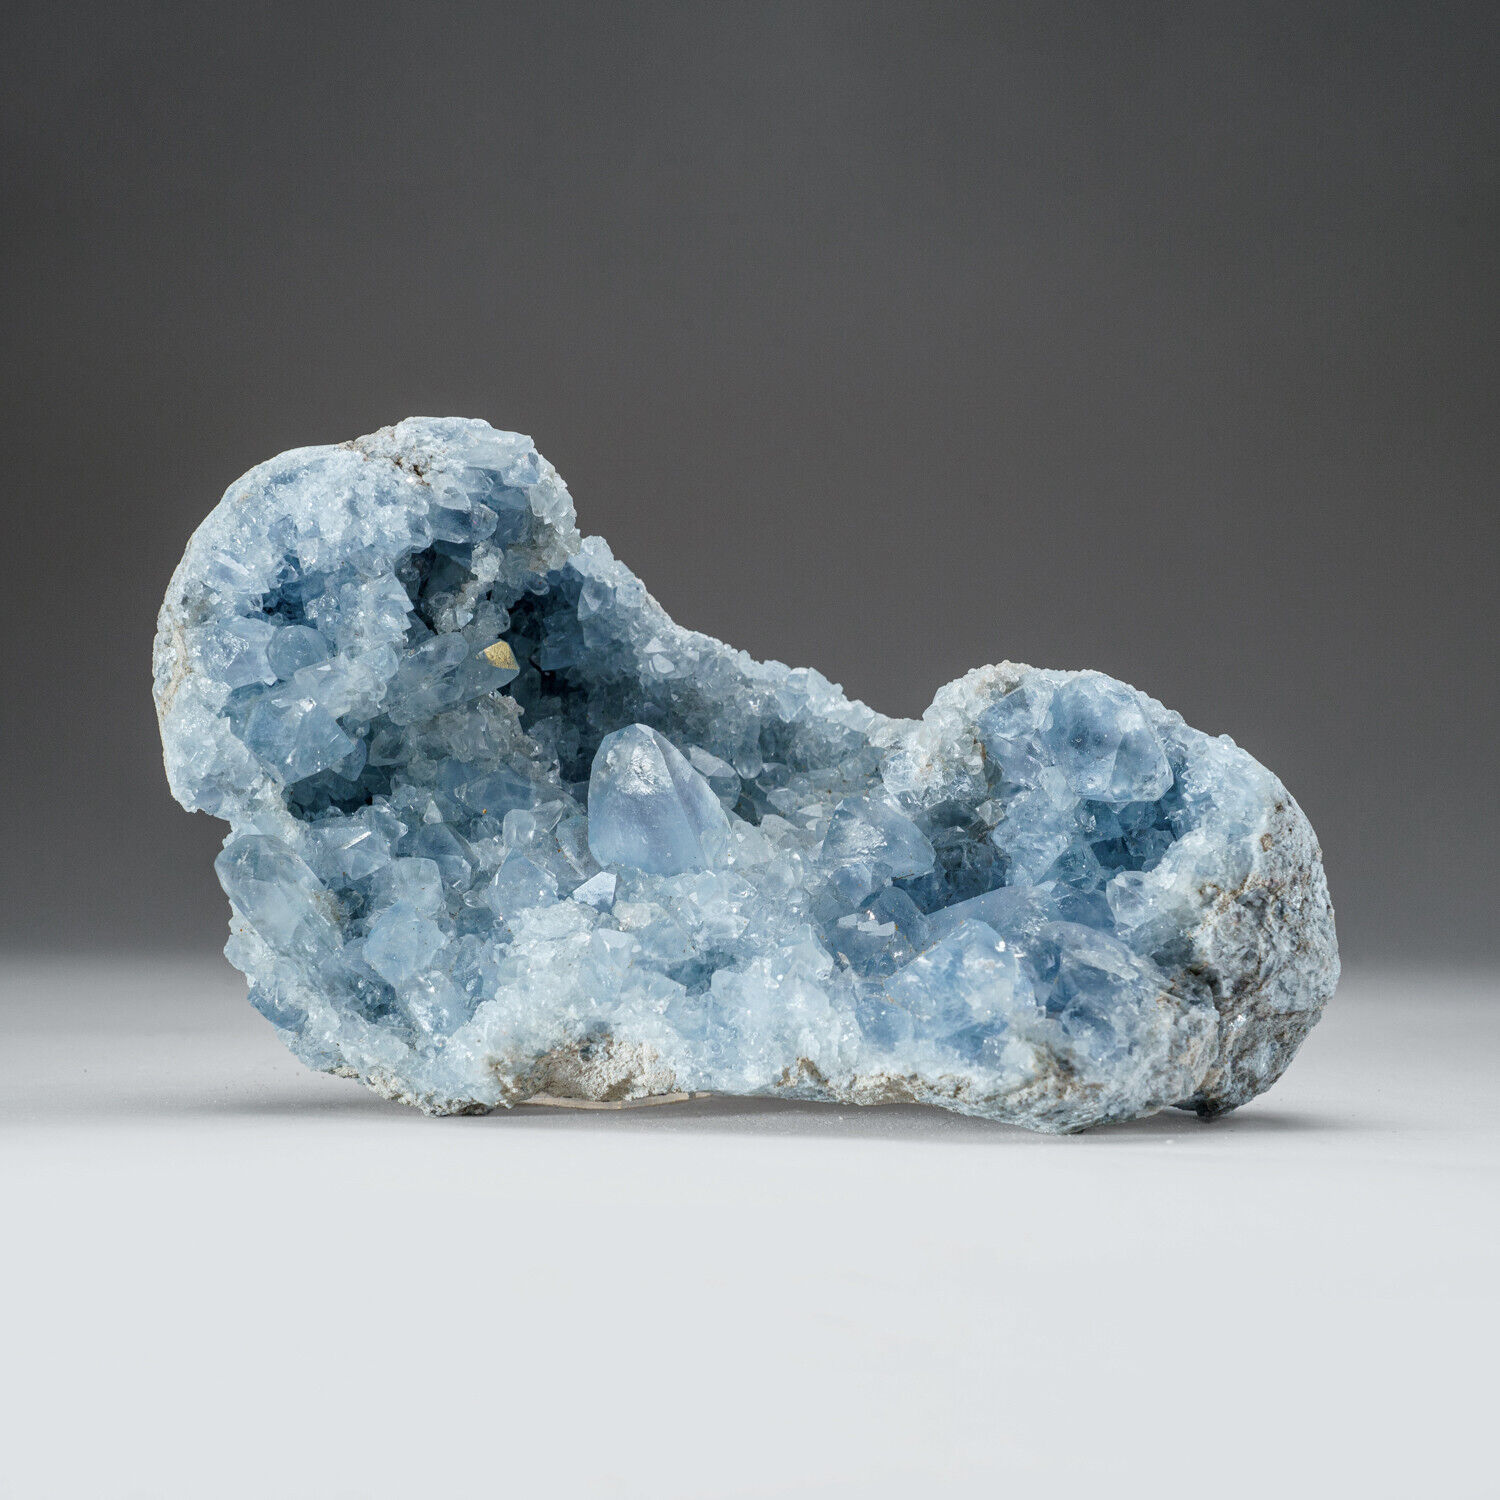 Blue Celestite Cluster Geode From Sankoany, Madagascar (5 lbs)